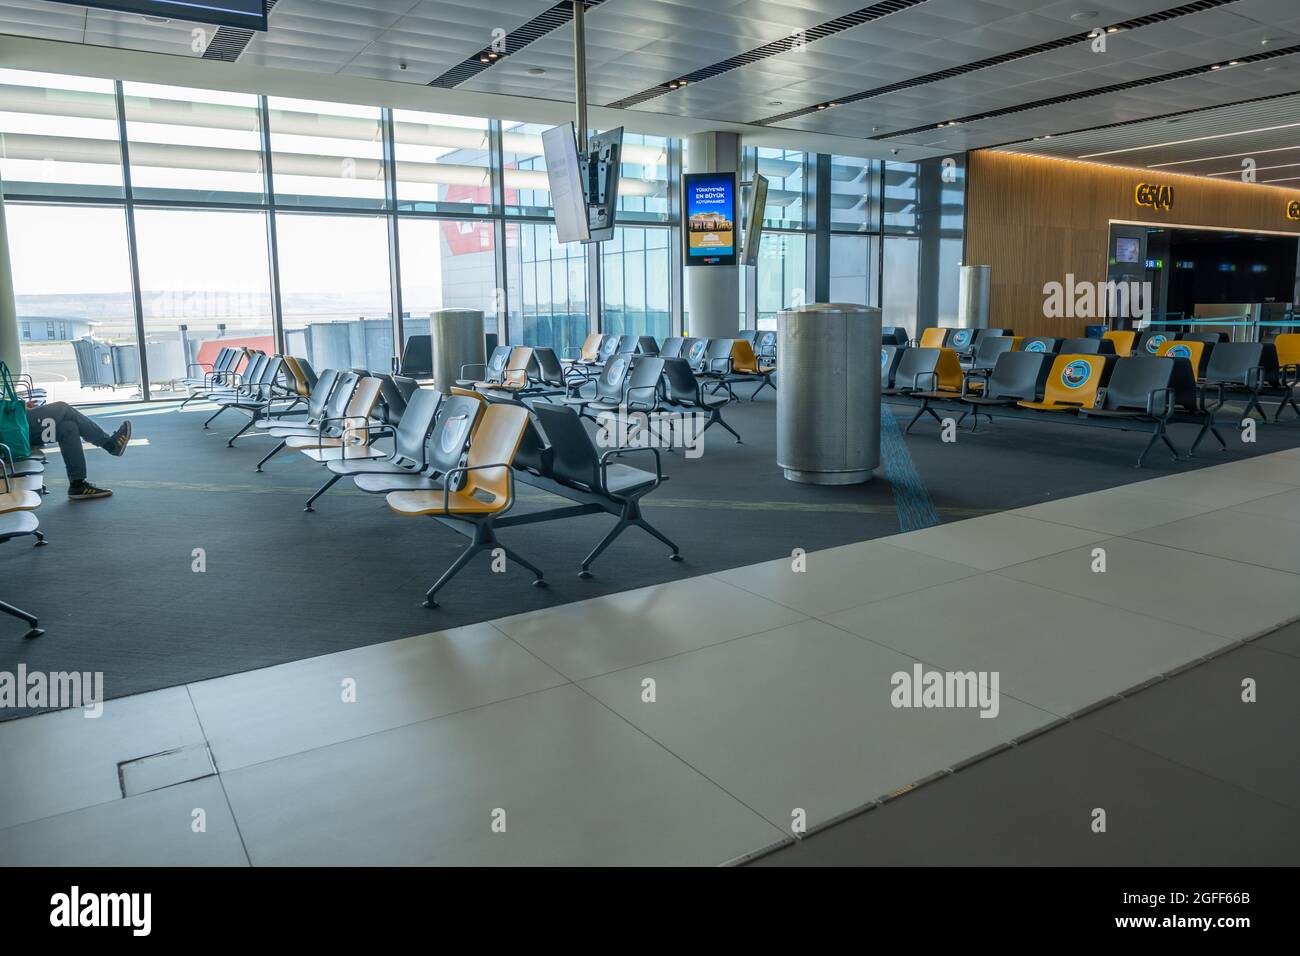 Arnavutkoy, Istanbul, Turkey - 03.08.2021: a lot of empty chairs and seats and shops in Istanbul Airport in quarantine days Stock Photo